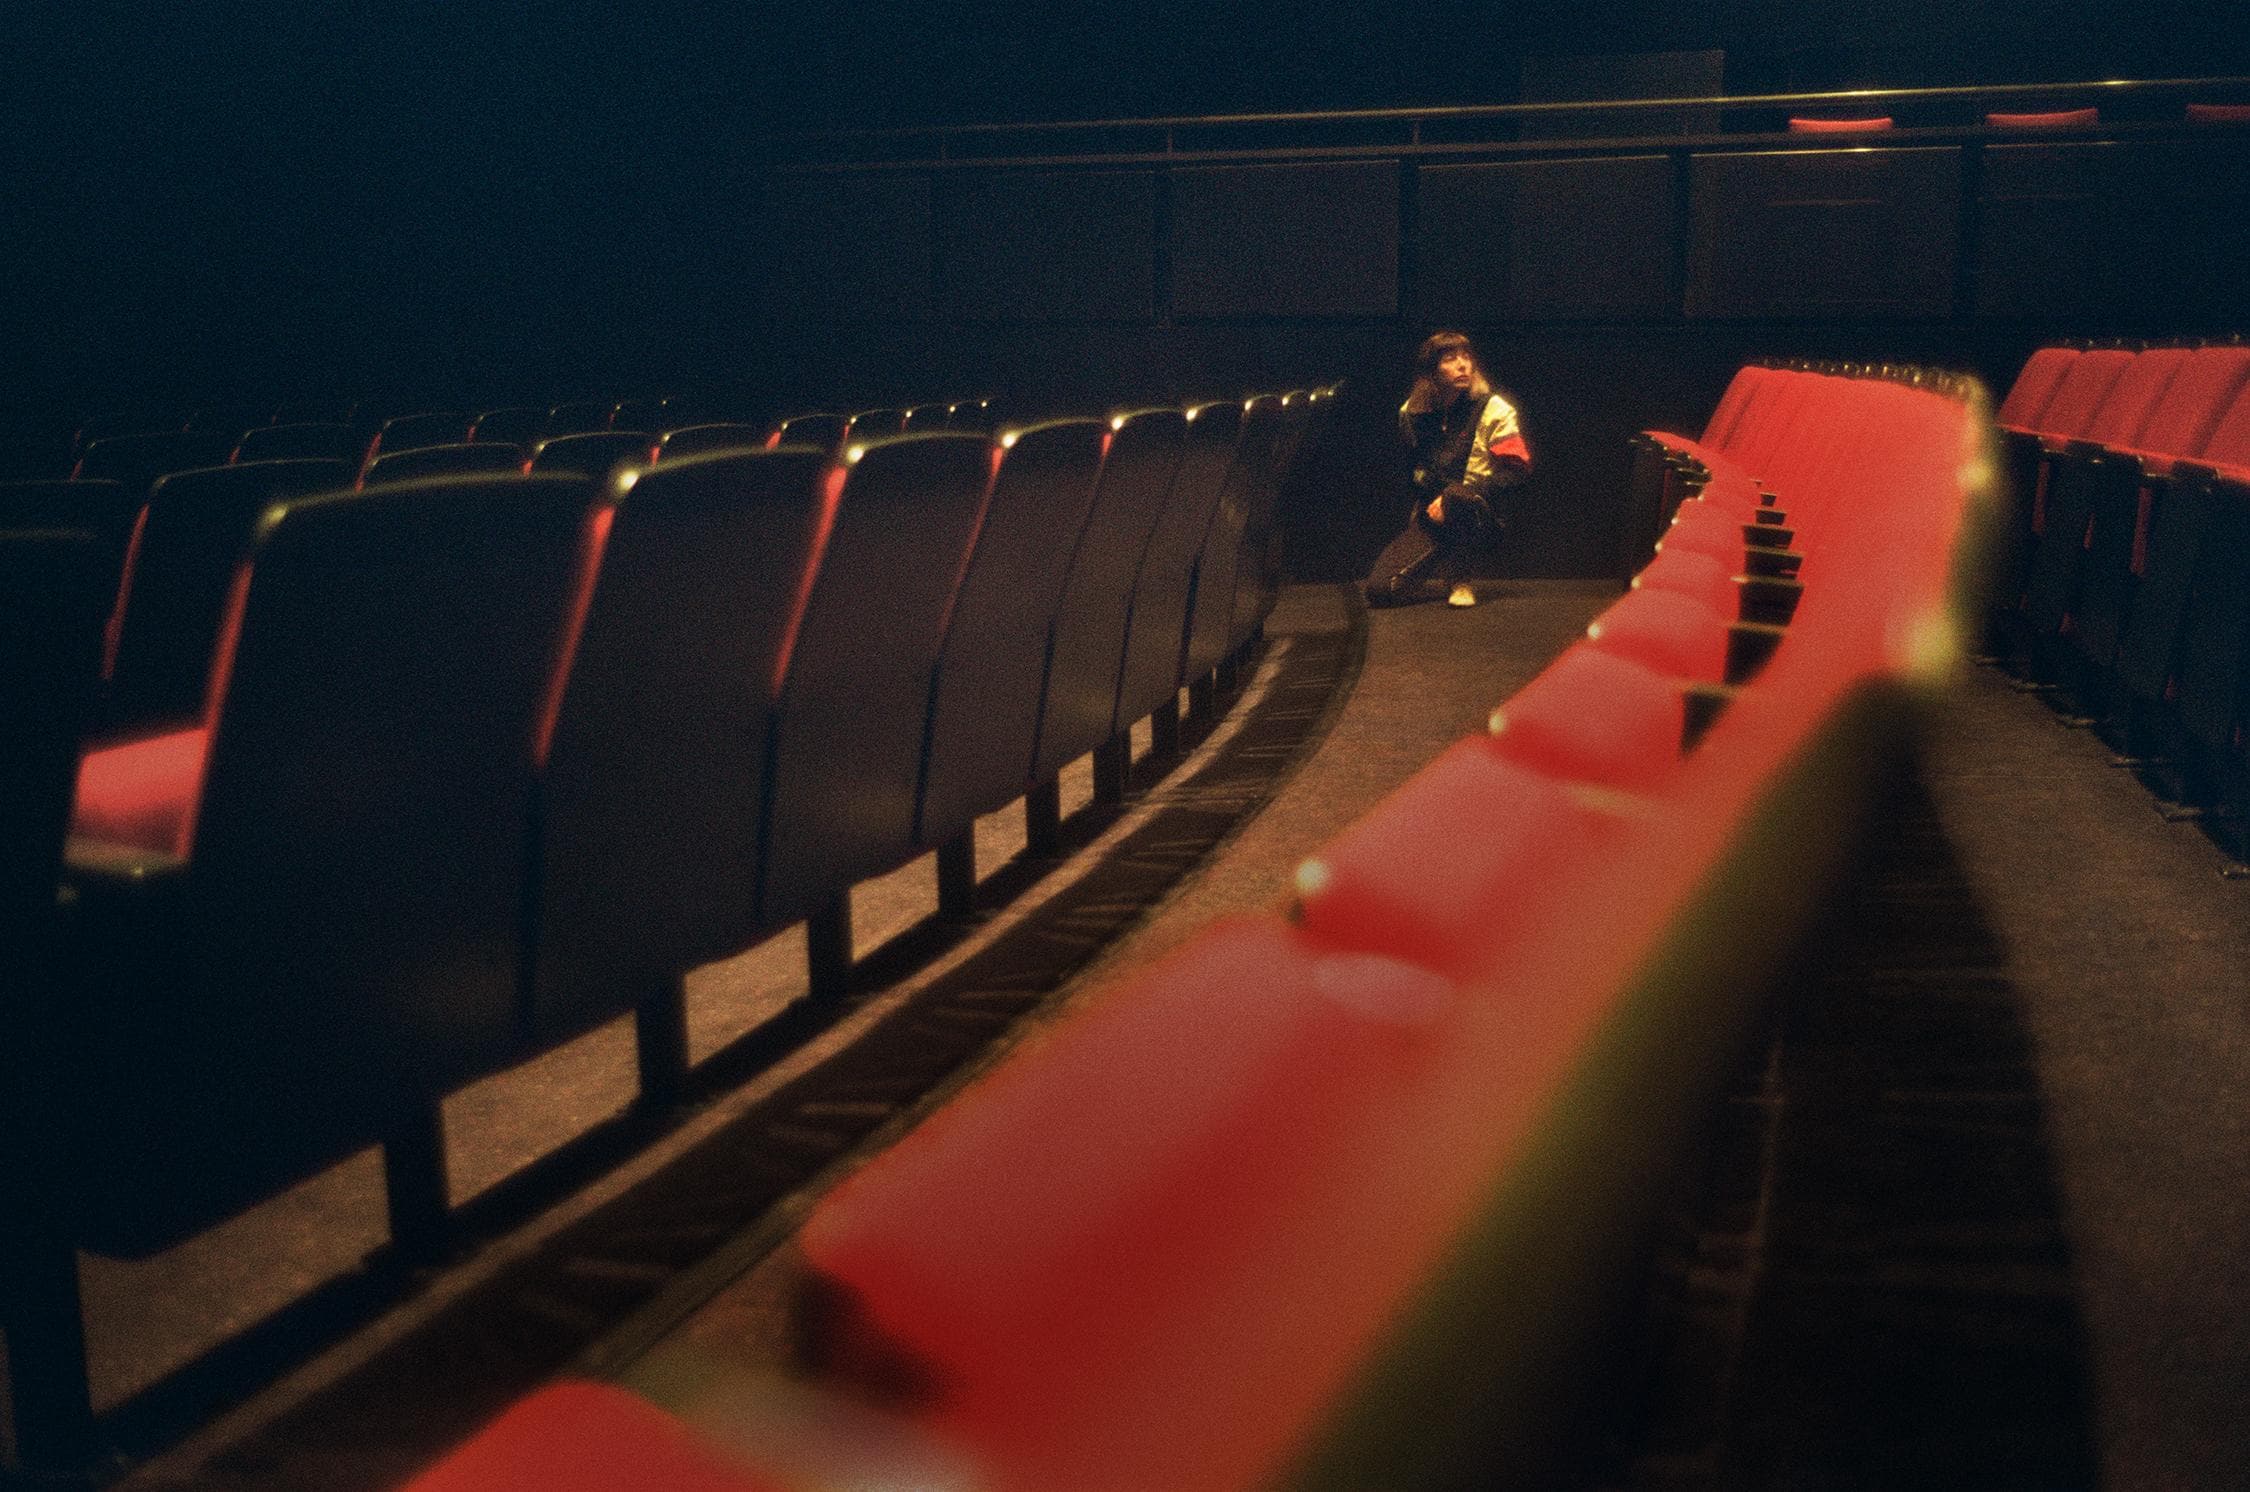 Rows of theater seats with artist in the back